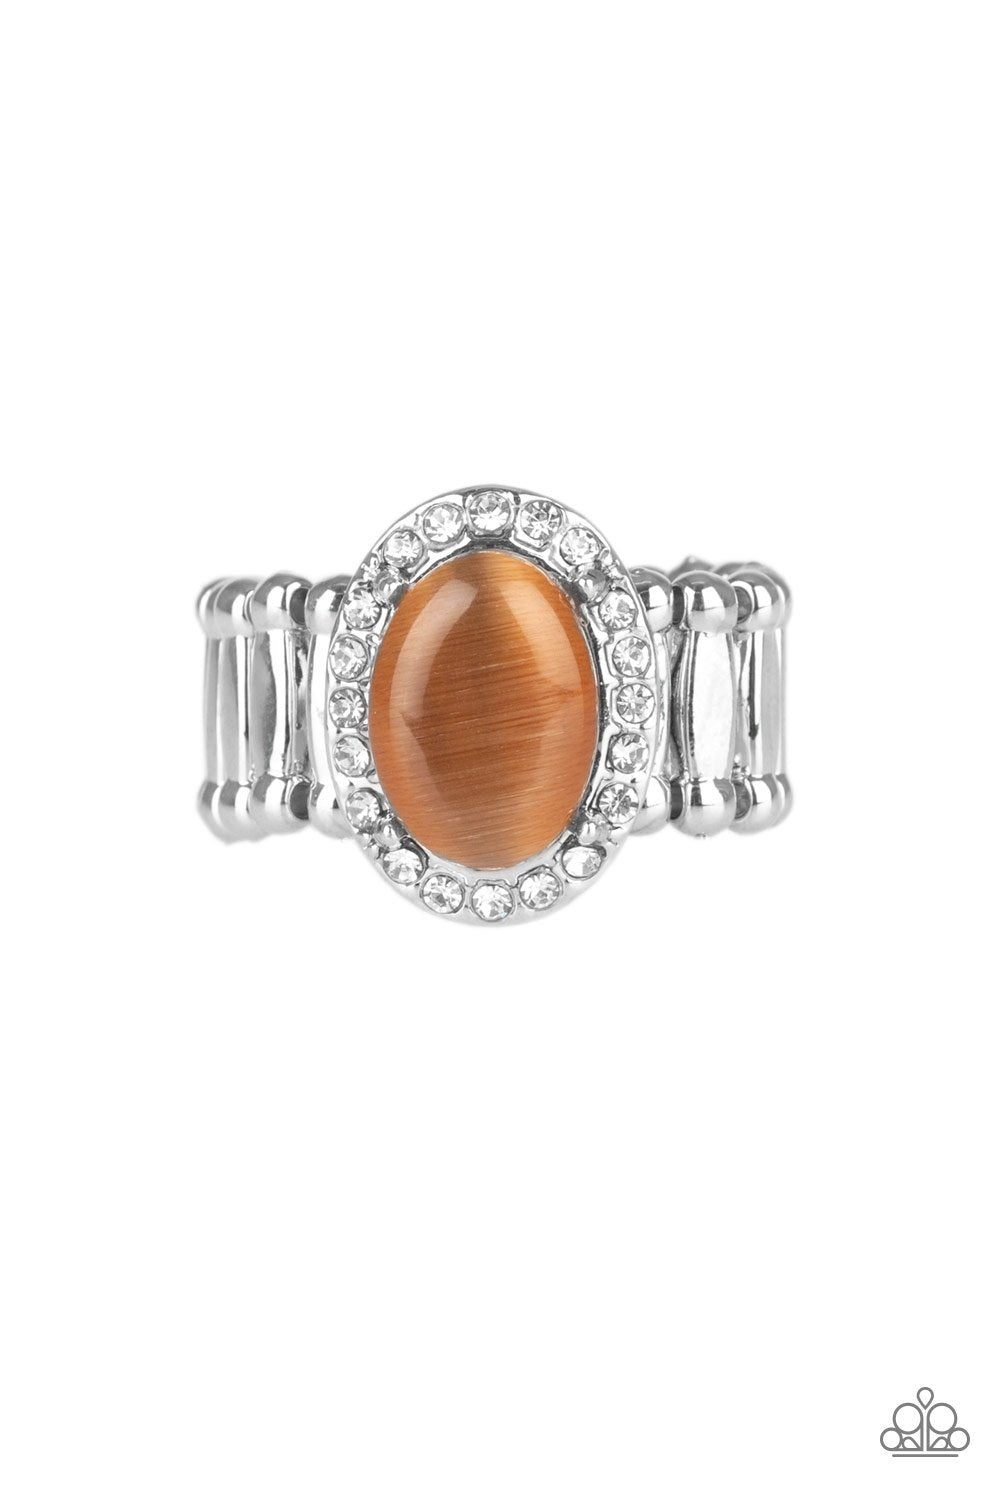 Laguna Luxury Brown Moonstone Ring - Paparazzi Accessories-CarasShop.com - $5 Jewelry by Cara Jewels